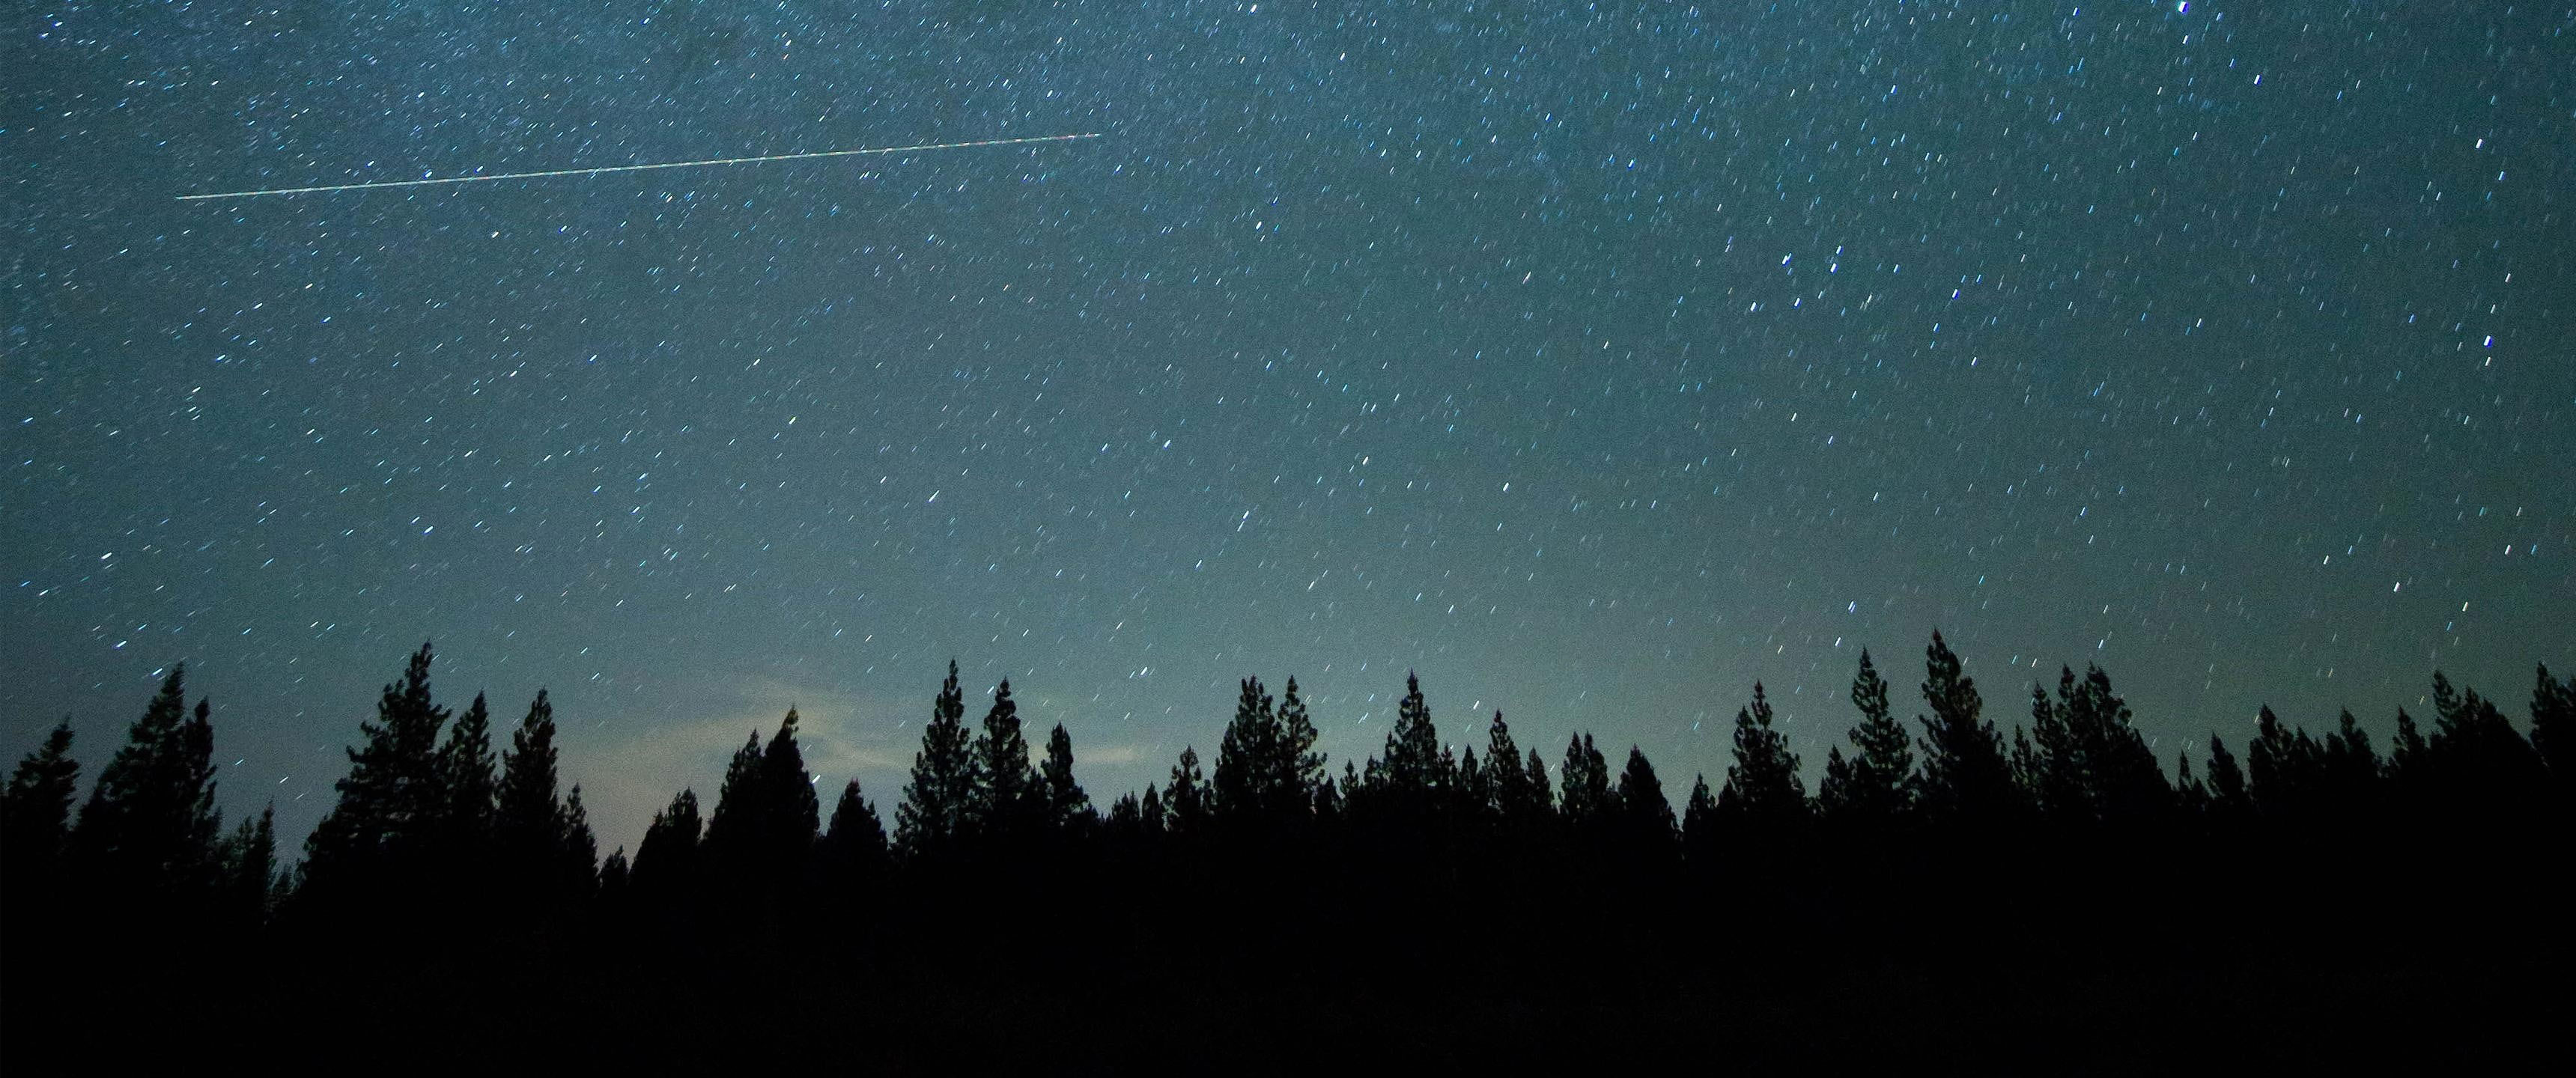 Wallpaper Trees And Stars, Ultrawide, Landscape, Nature, Landscape, Space